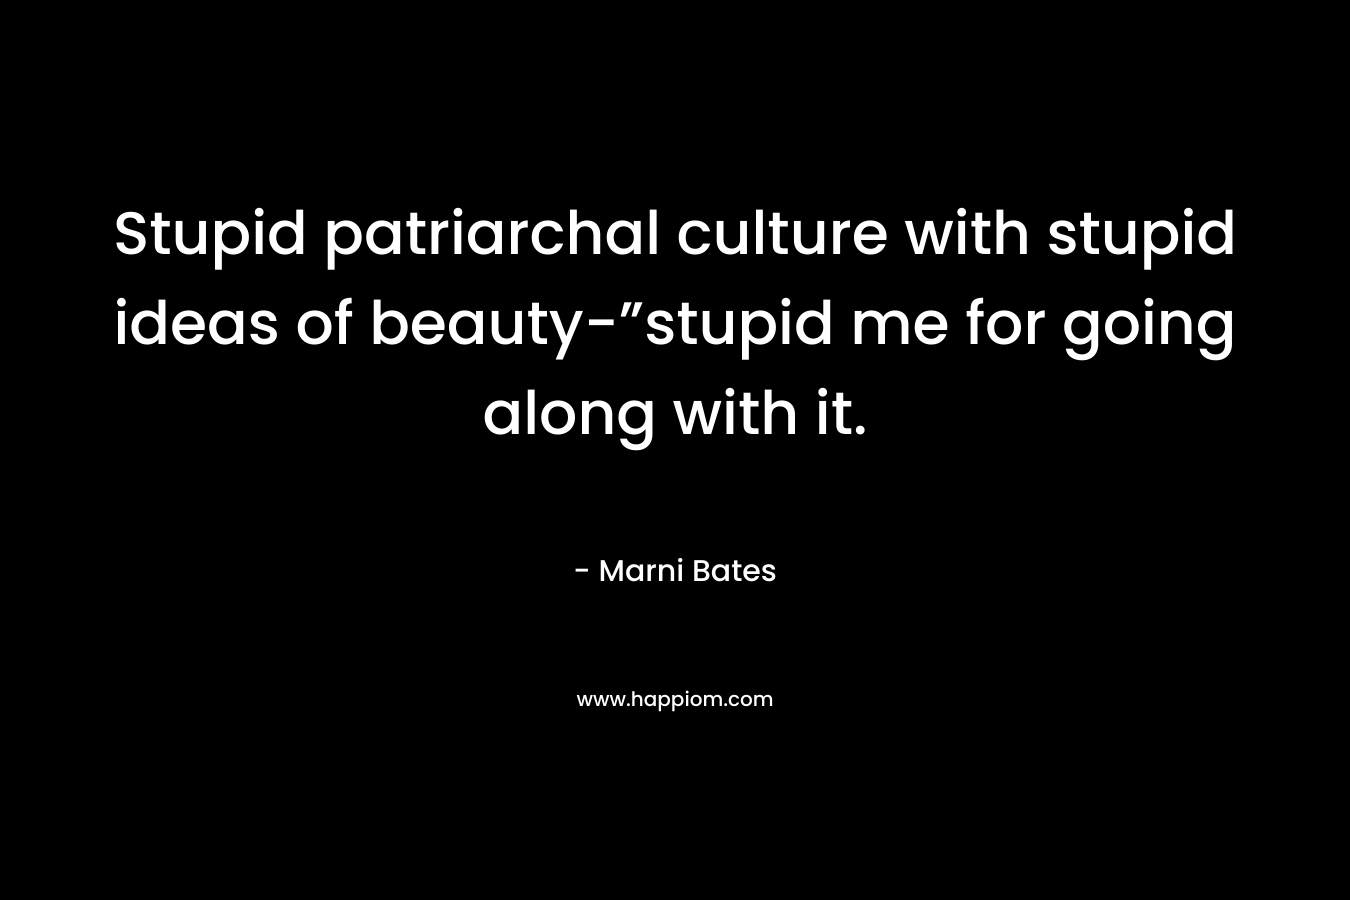 Stupid patriarchal culture with stupid ideas of beauty-”stupid me for going along with it. – Marni Bates